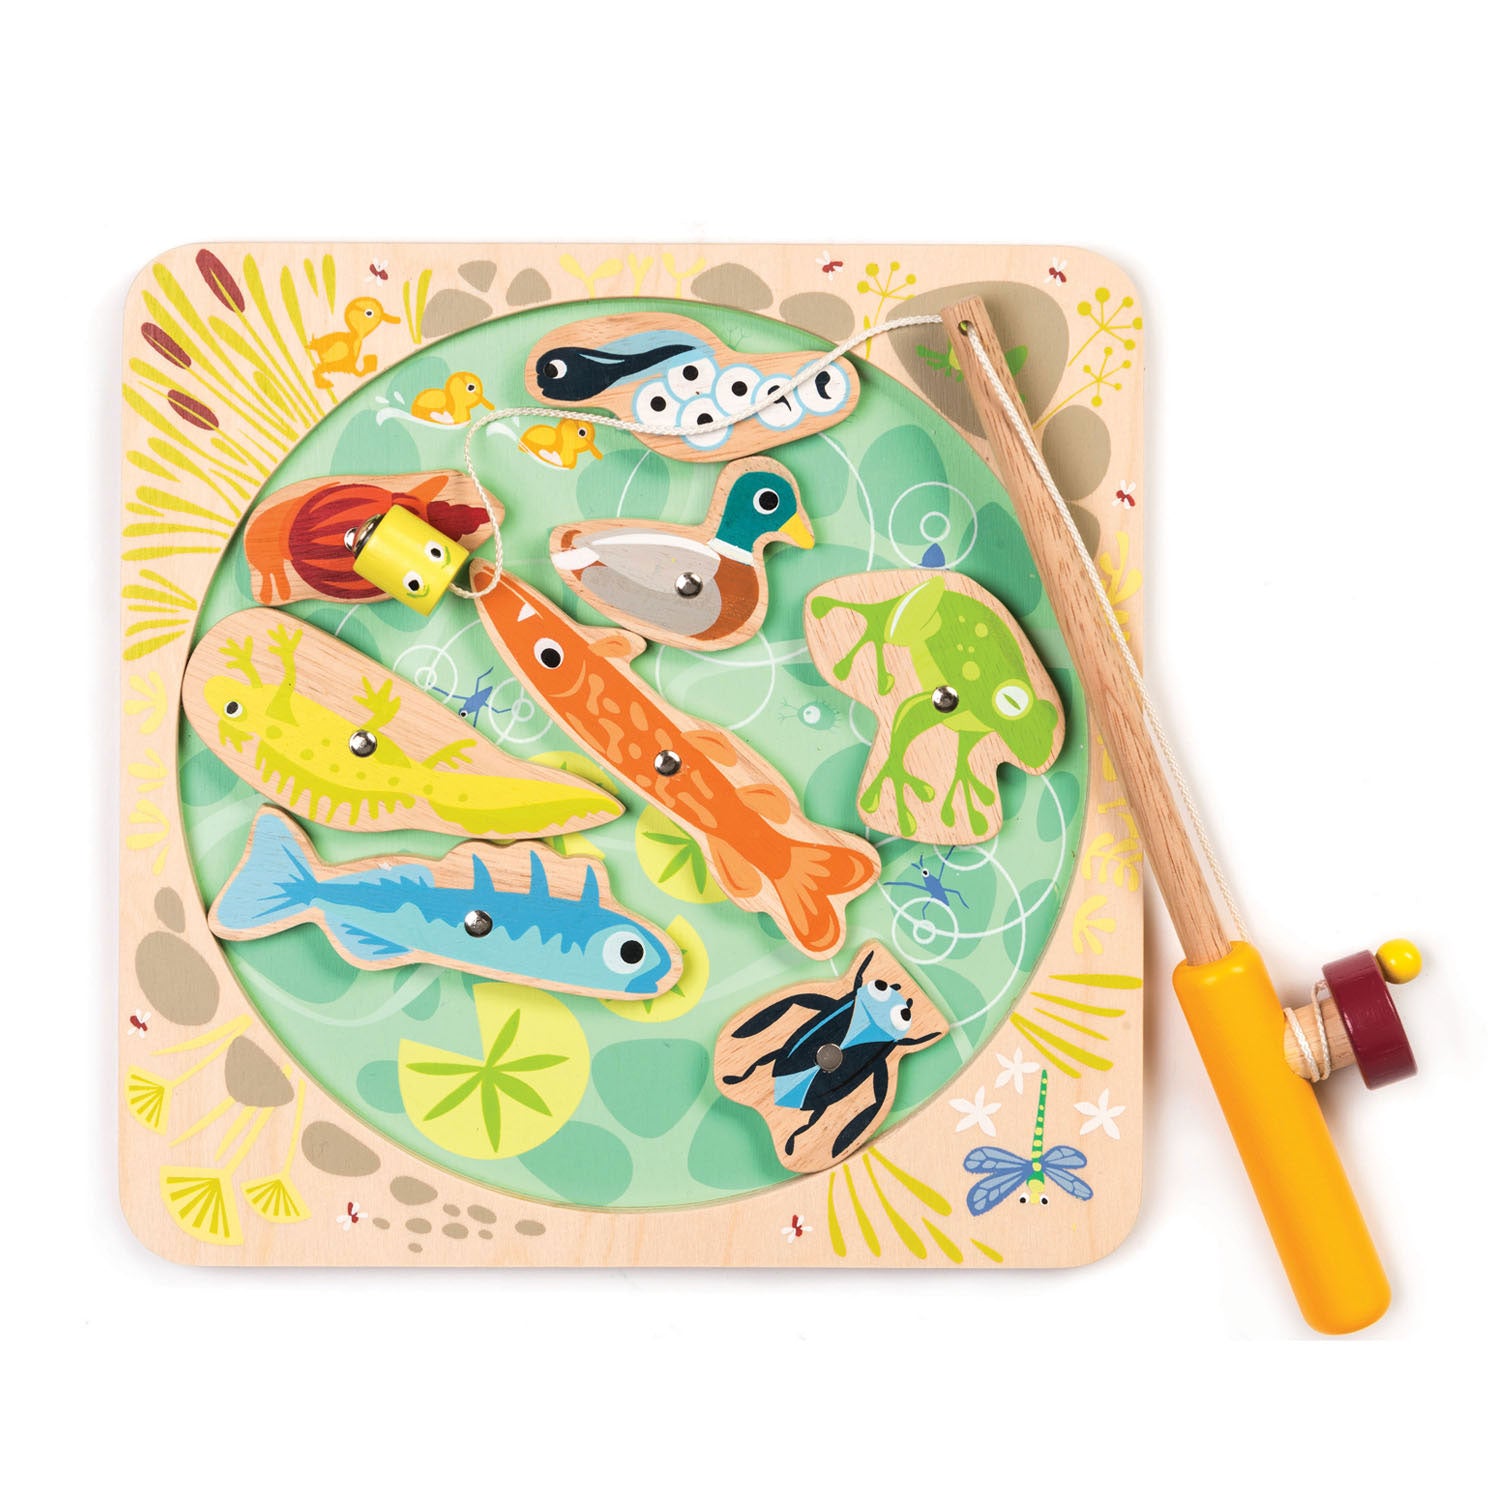 <p>Let’s go fishing! The set includes a fully stocked pond, an extendable fishing rod with a magnetic end and 8 magnetized pond animals. The length of the rod can be adjusted to fit different playing levels. Children can learn about ecosystems and develop their fine motor skills. </p>
<p>Age range: 3 Years And Older  </p>
<p>Product size: 8.86&quot; x 8.86&quot; x 0.39&quot;  </p>
<p>Weight: 0.66 lbs</p>
